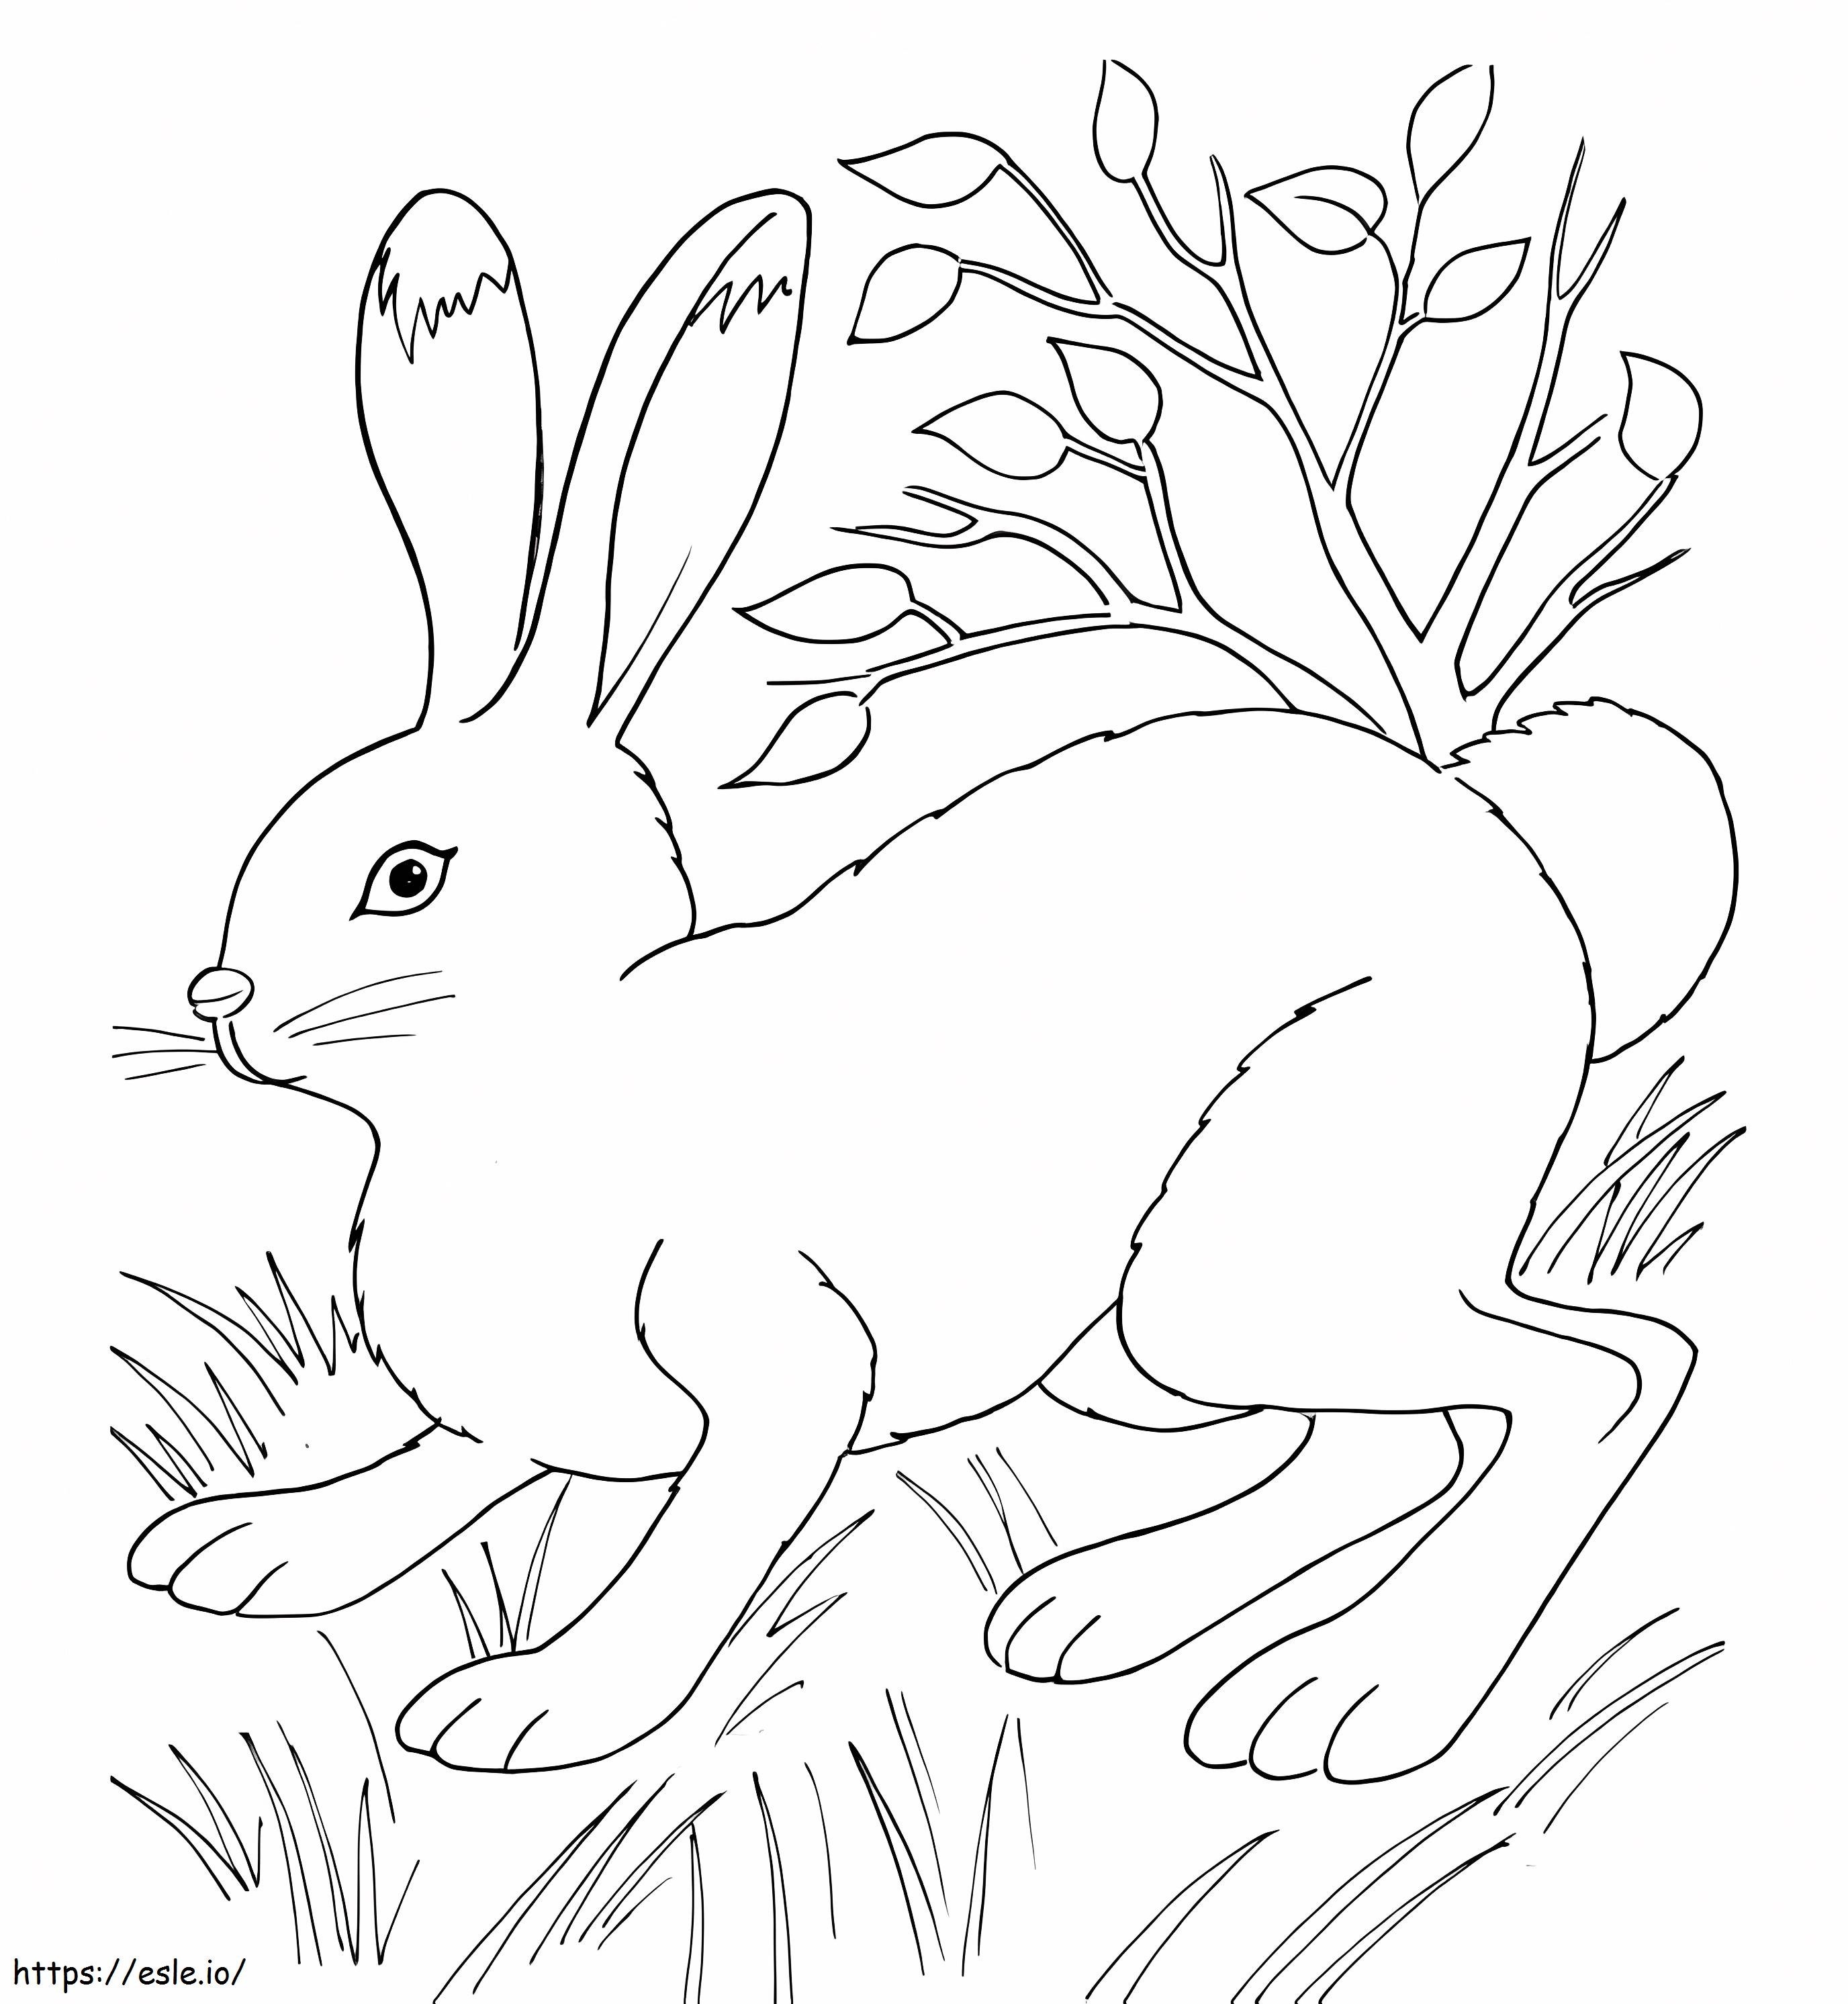 Rabbit On Grass coloring page